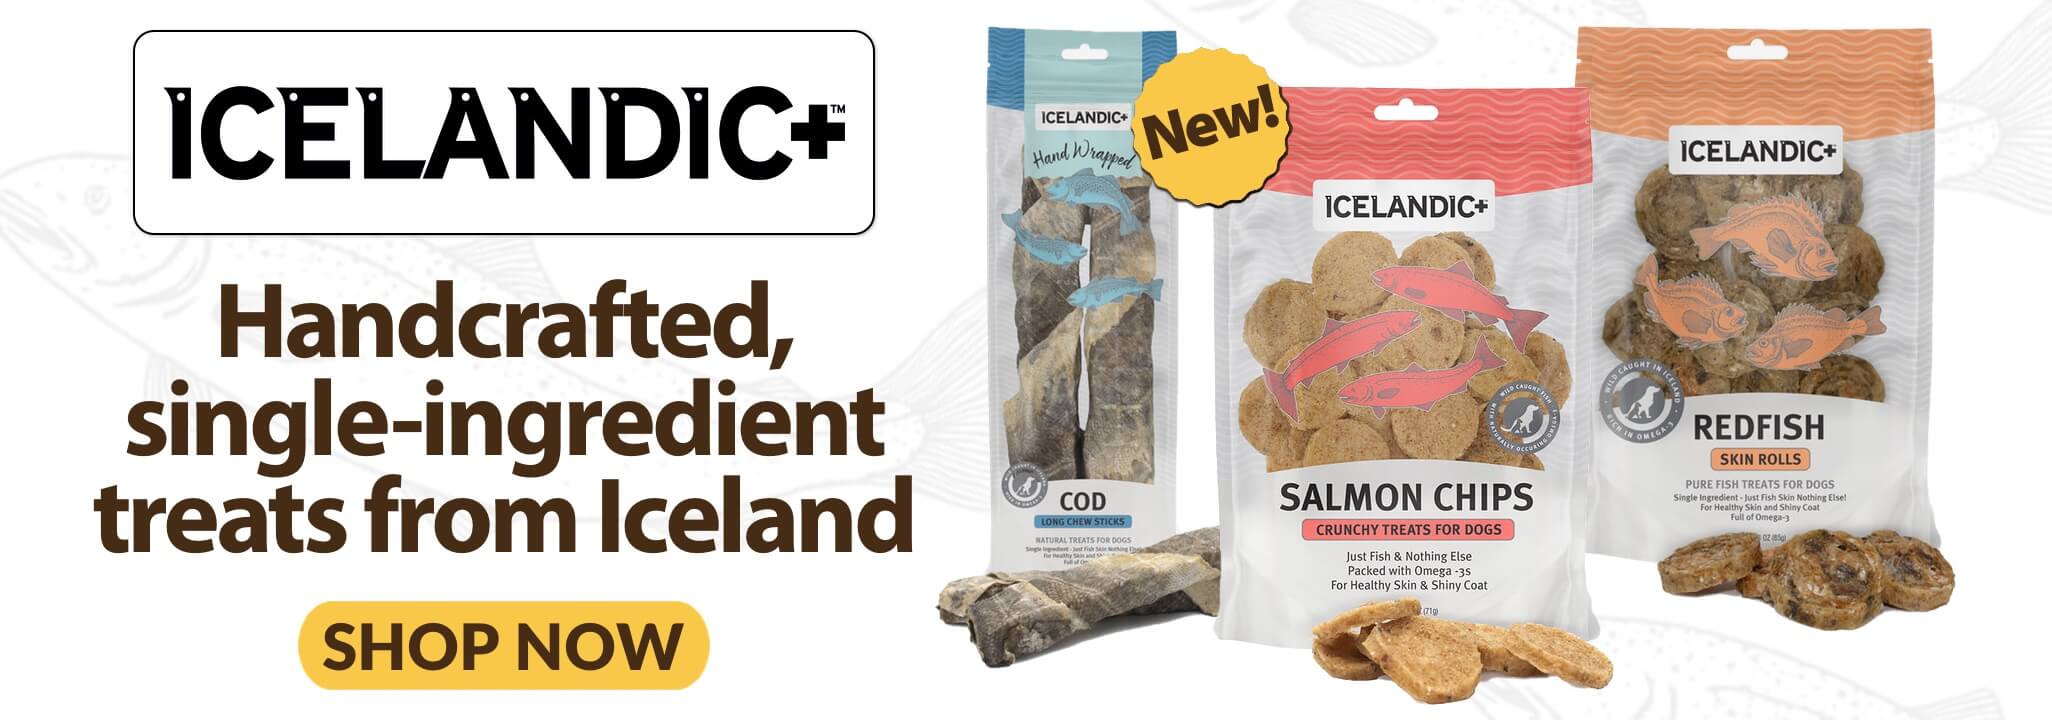 Icelandic Plus Handcrafted single-ingredient treats from Iceland Shop Now